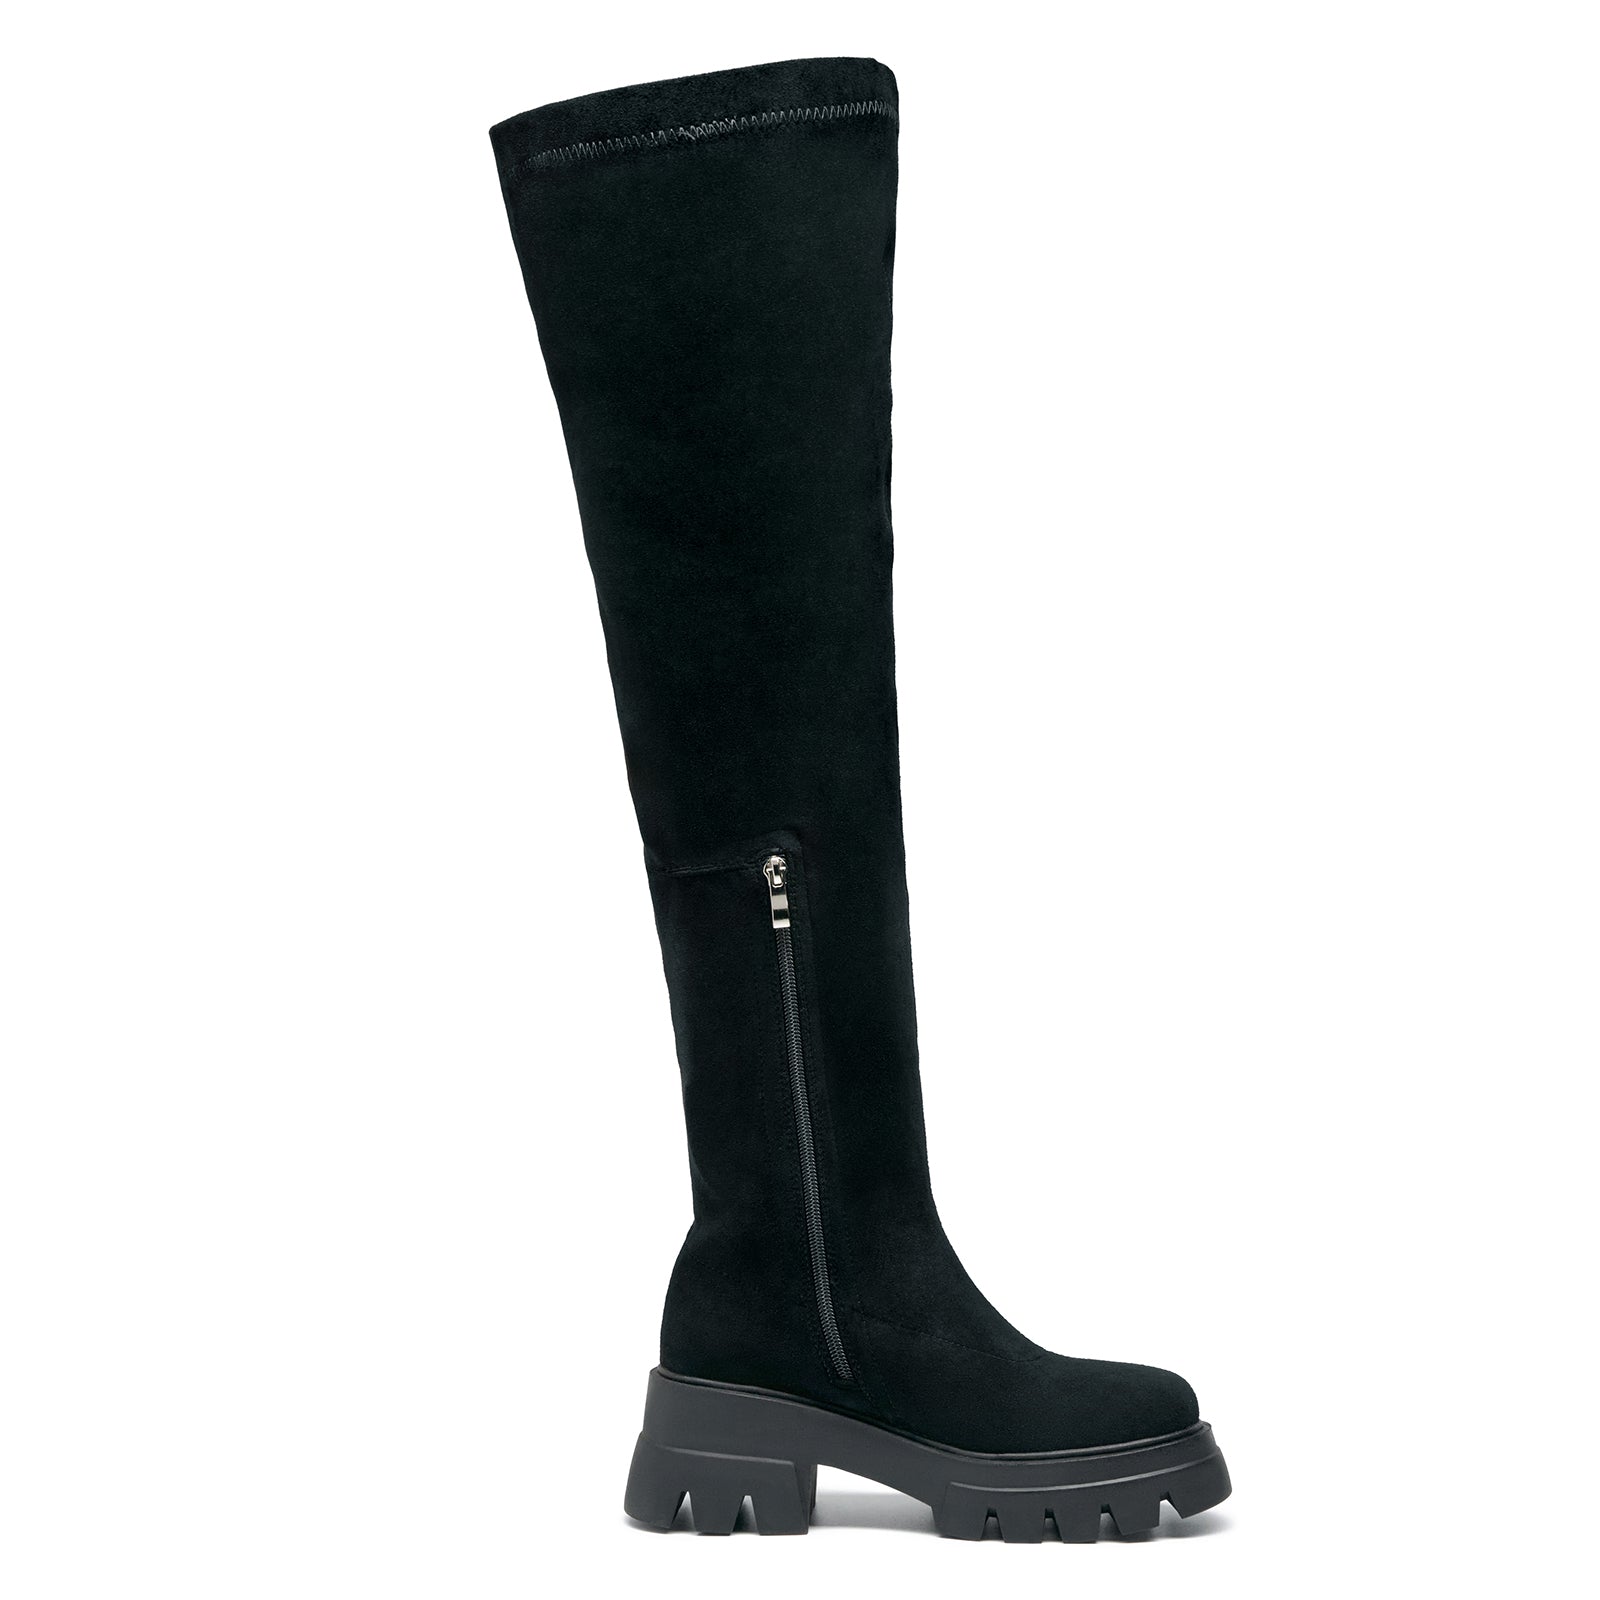 Women's Thigh High Boots Black Platform Slouch Over The Knee Black Boots